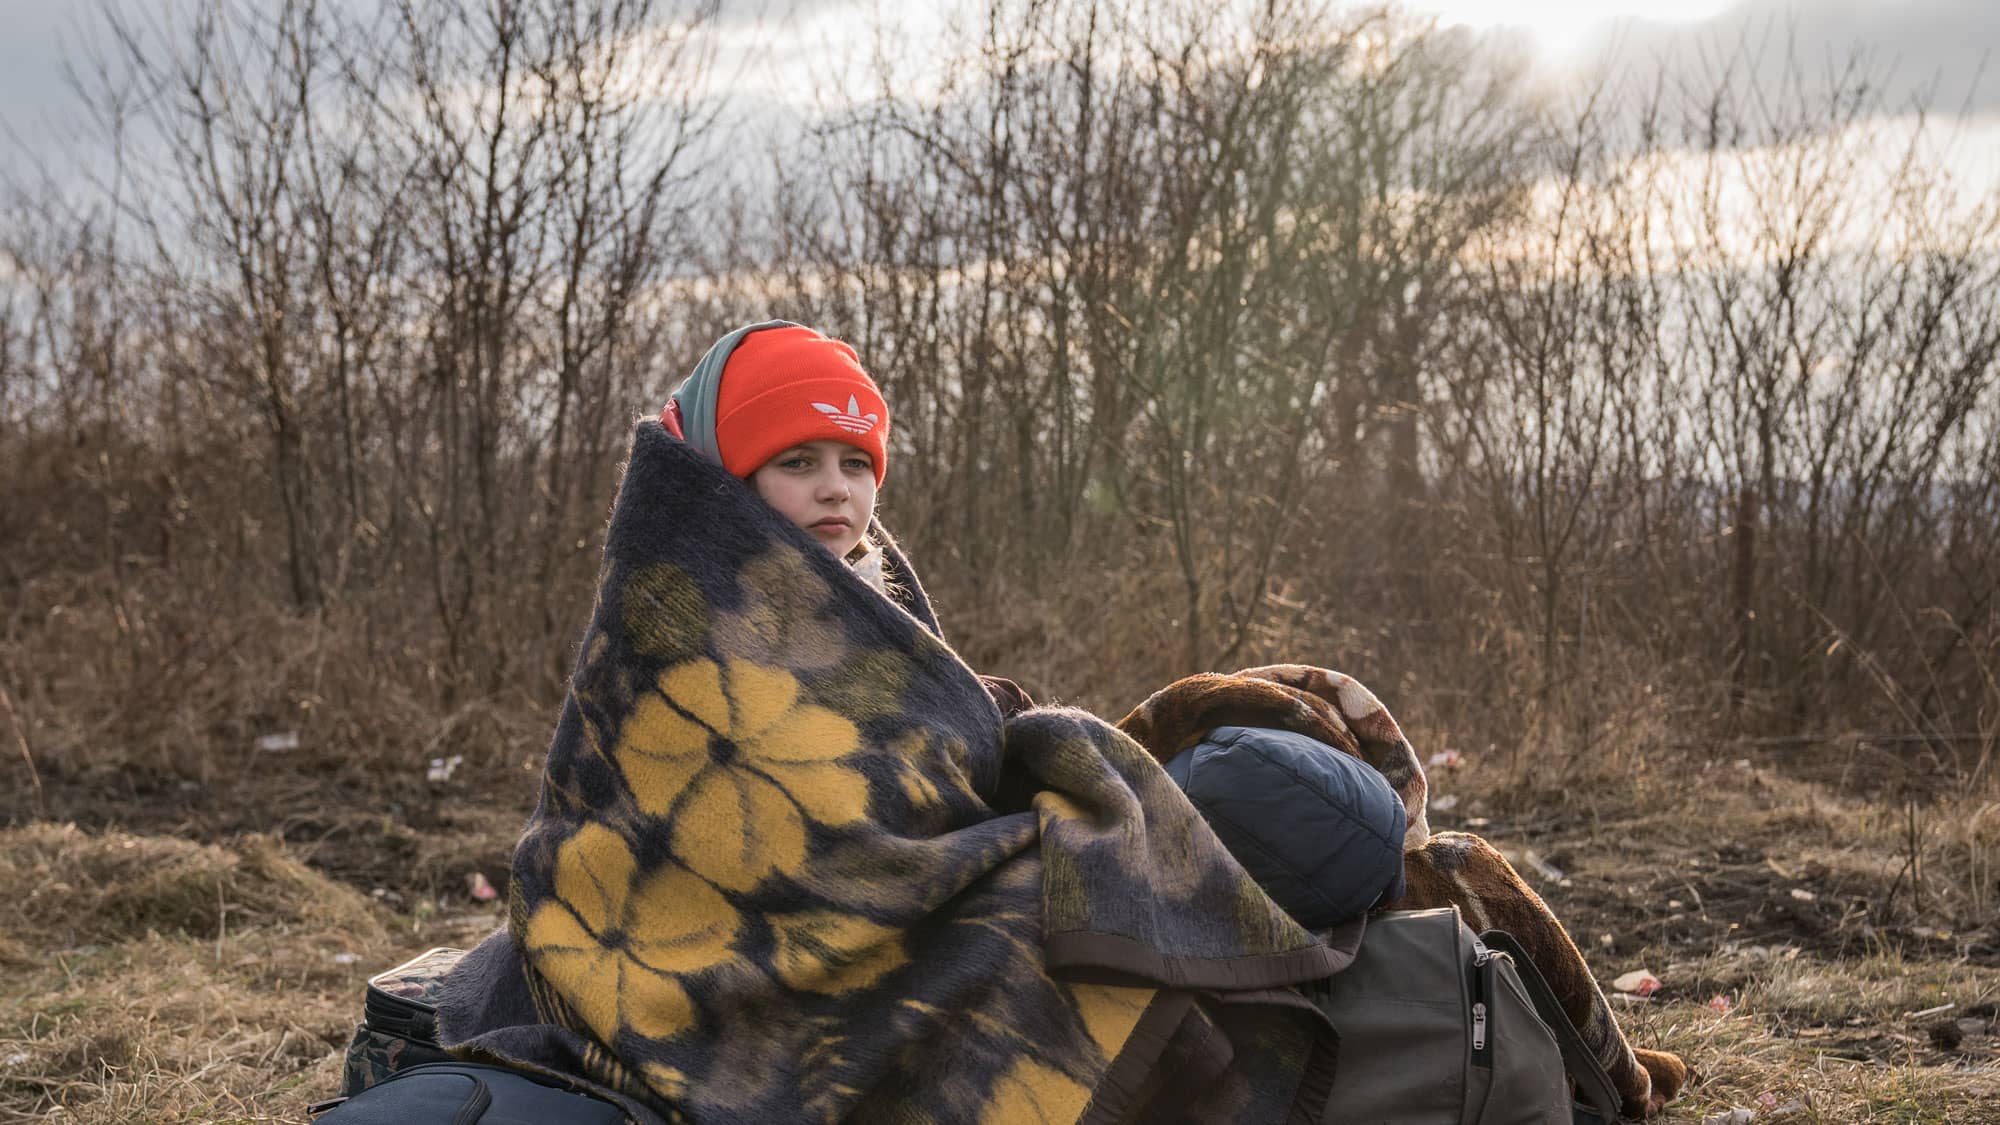 A young girl from Khmelnytskyi, western Ukraine, who fled with her mother to Romania on Feb. 28, 2022, to escape conflict.